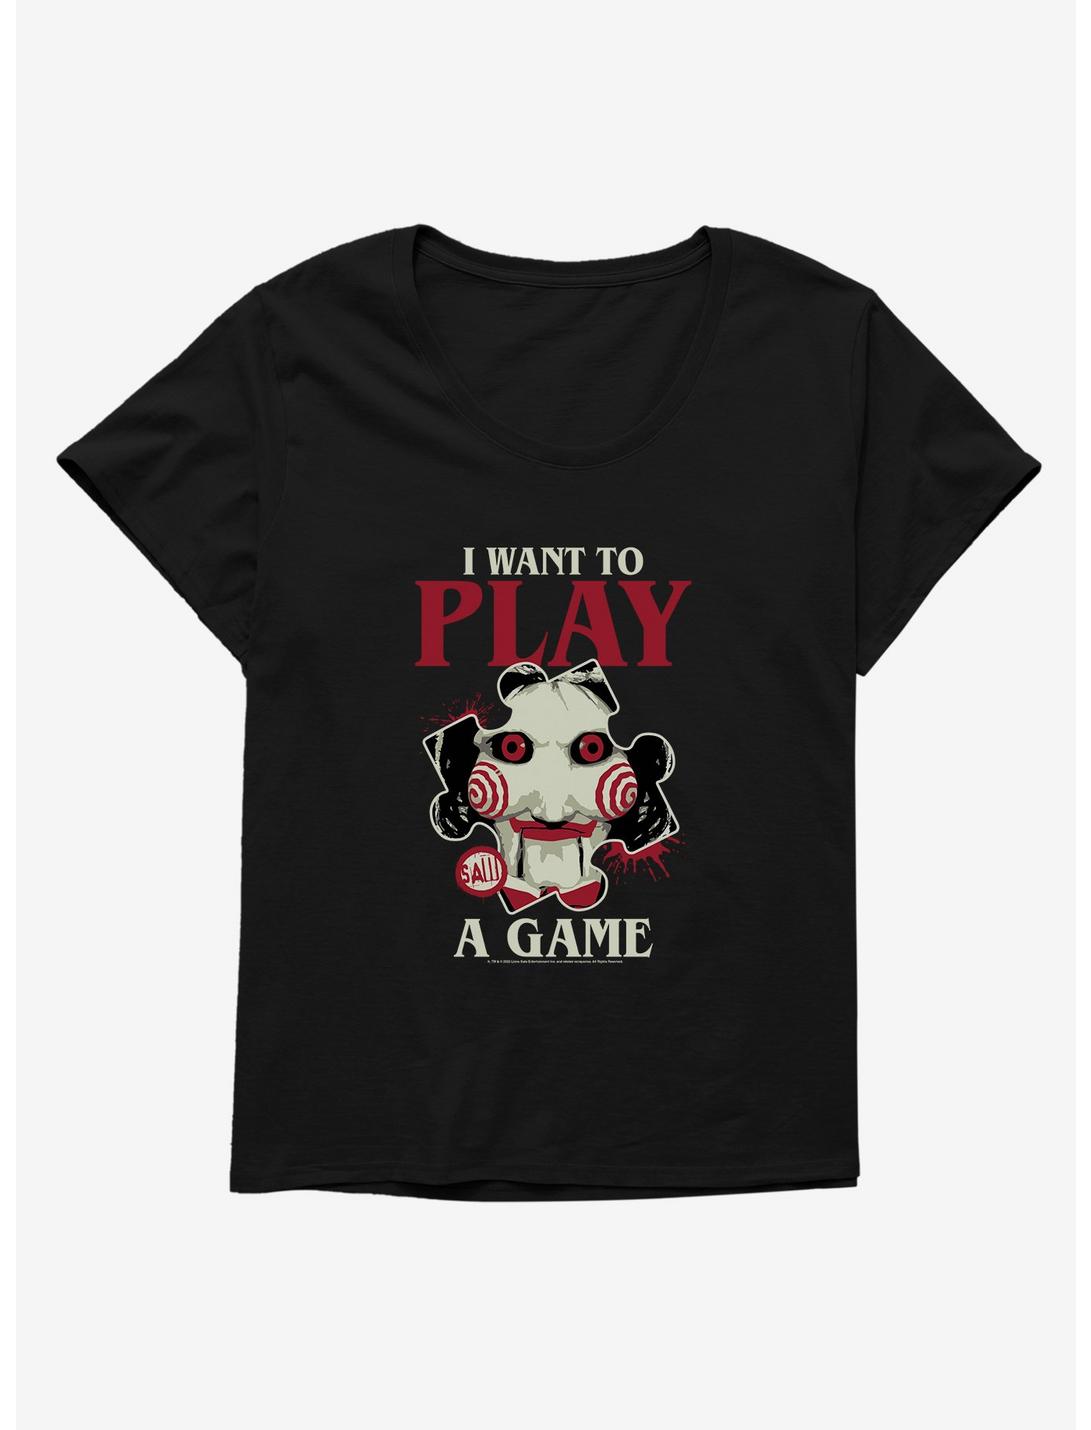 Saw I Want To Play A Game Womens T-Shirt Plus Size, BLACK, hi-res